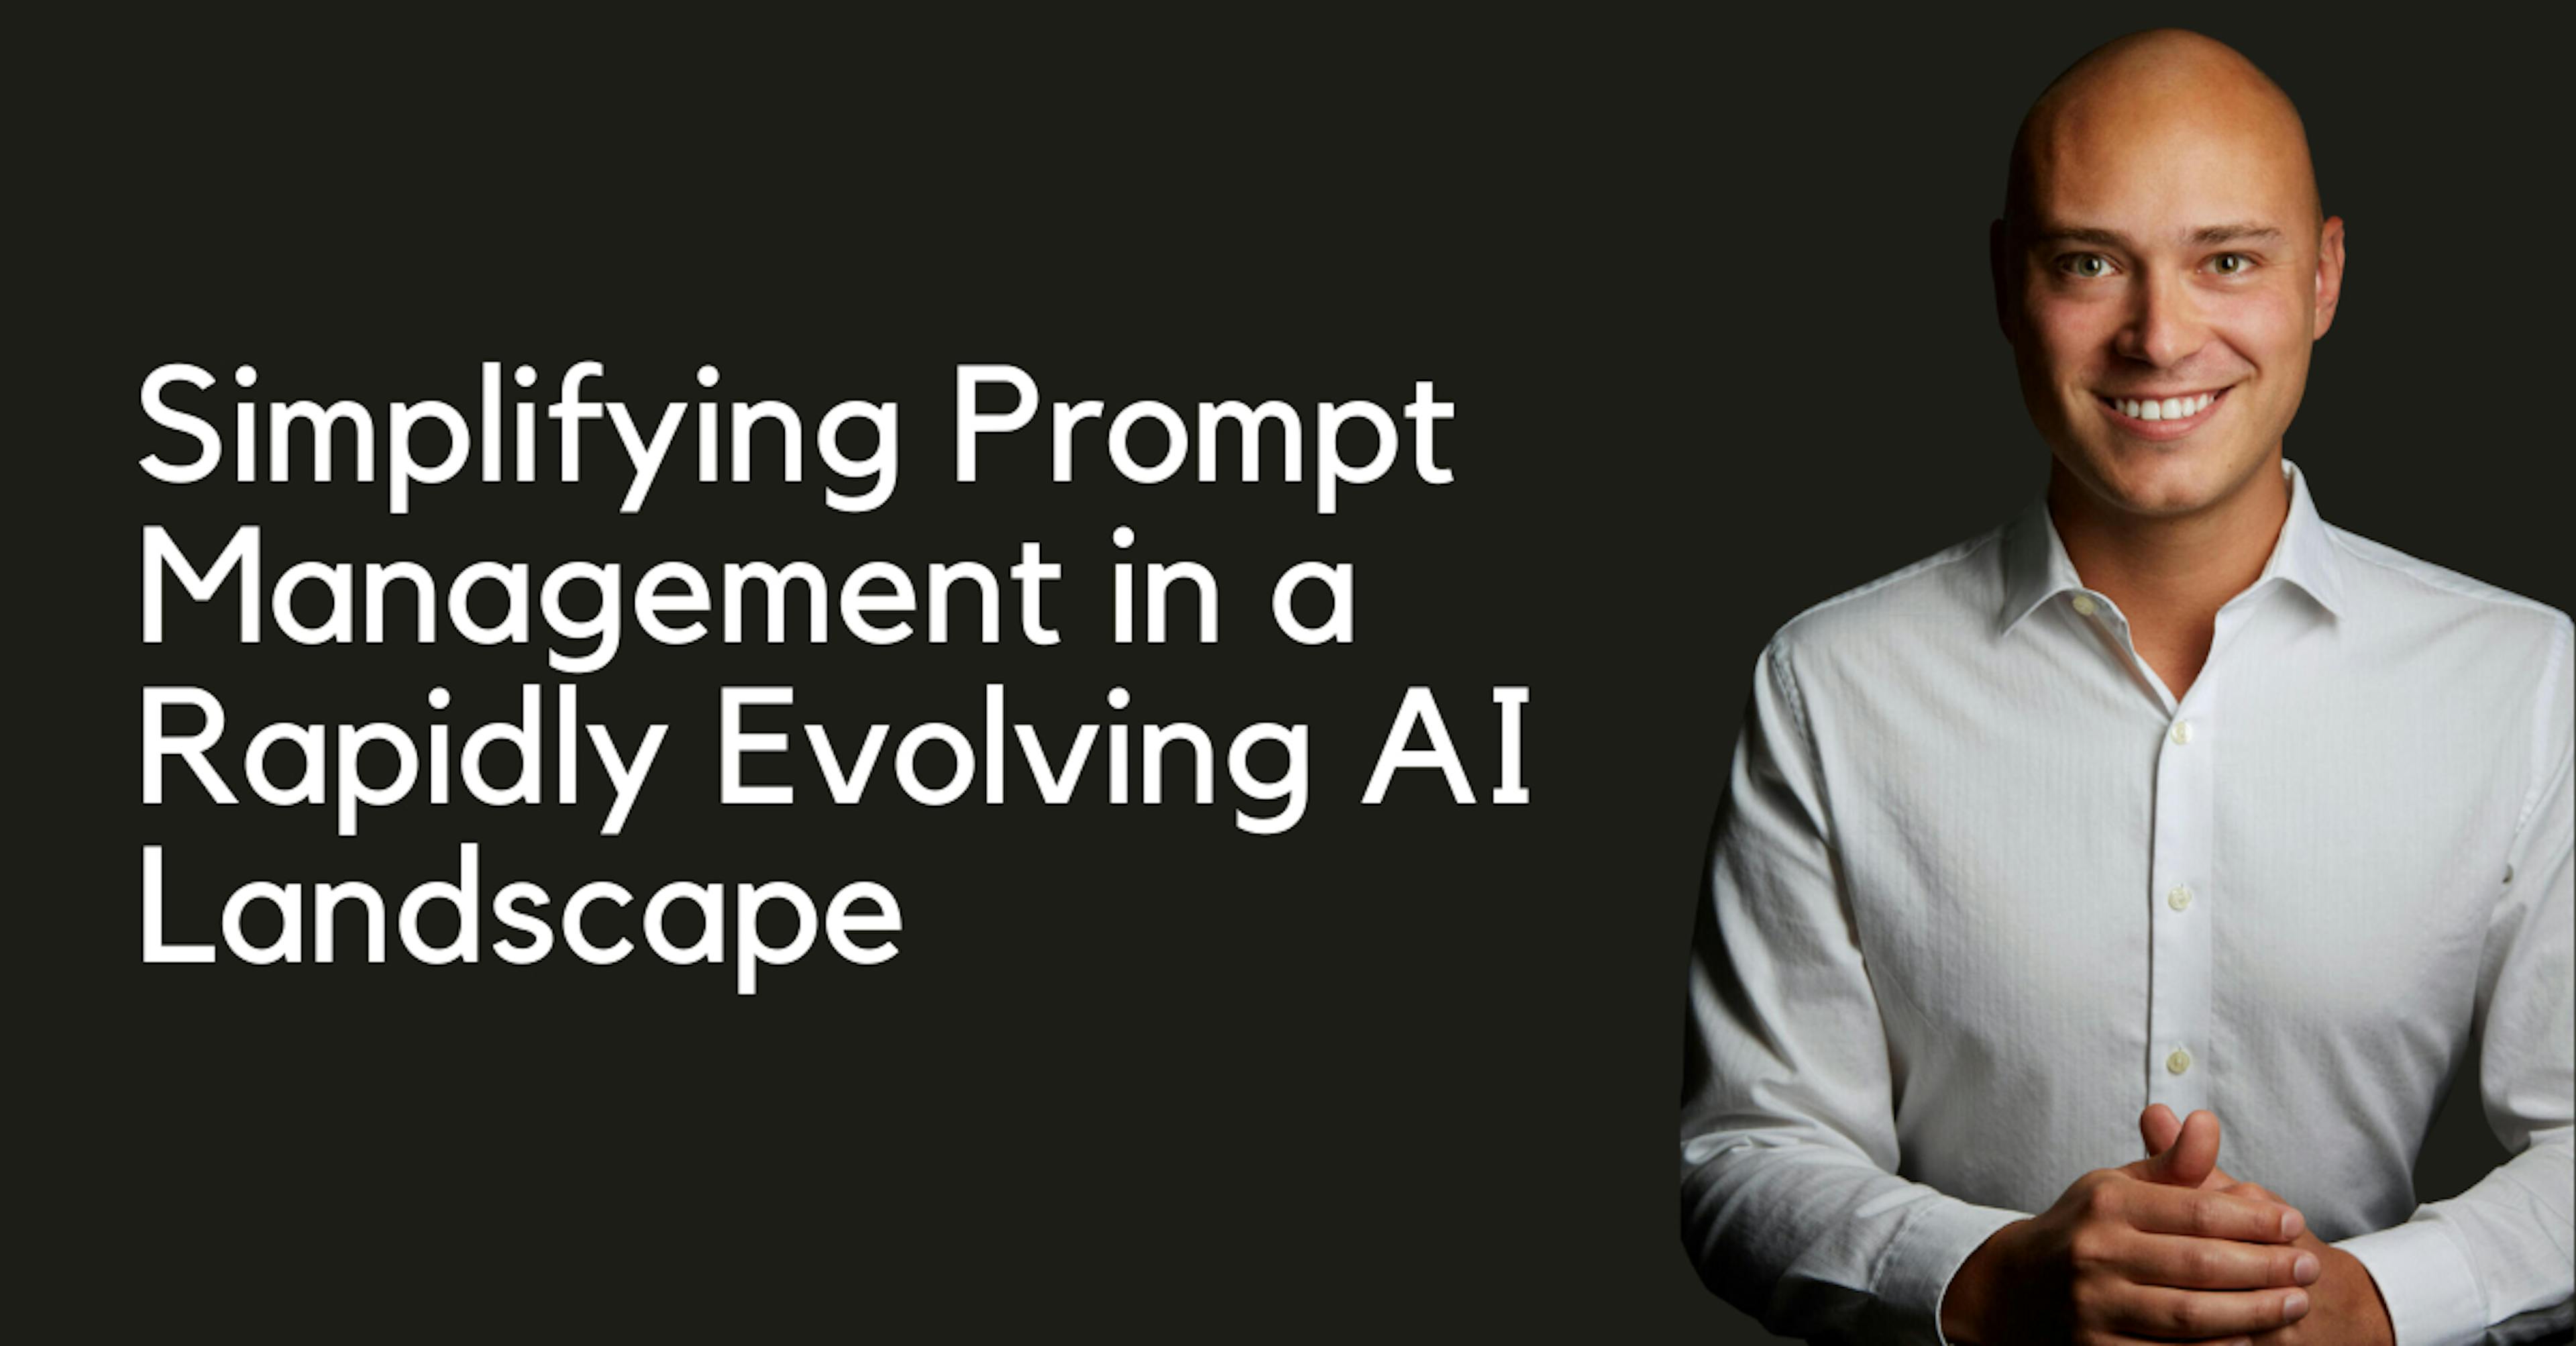 featured image - PromptDesk: Simplifying Prompt Management in a Rapidly Evolving AI Landscape 